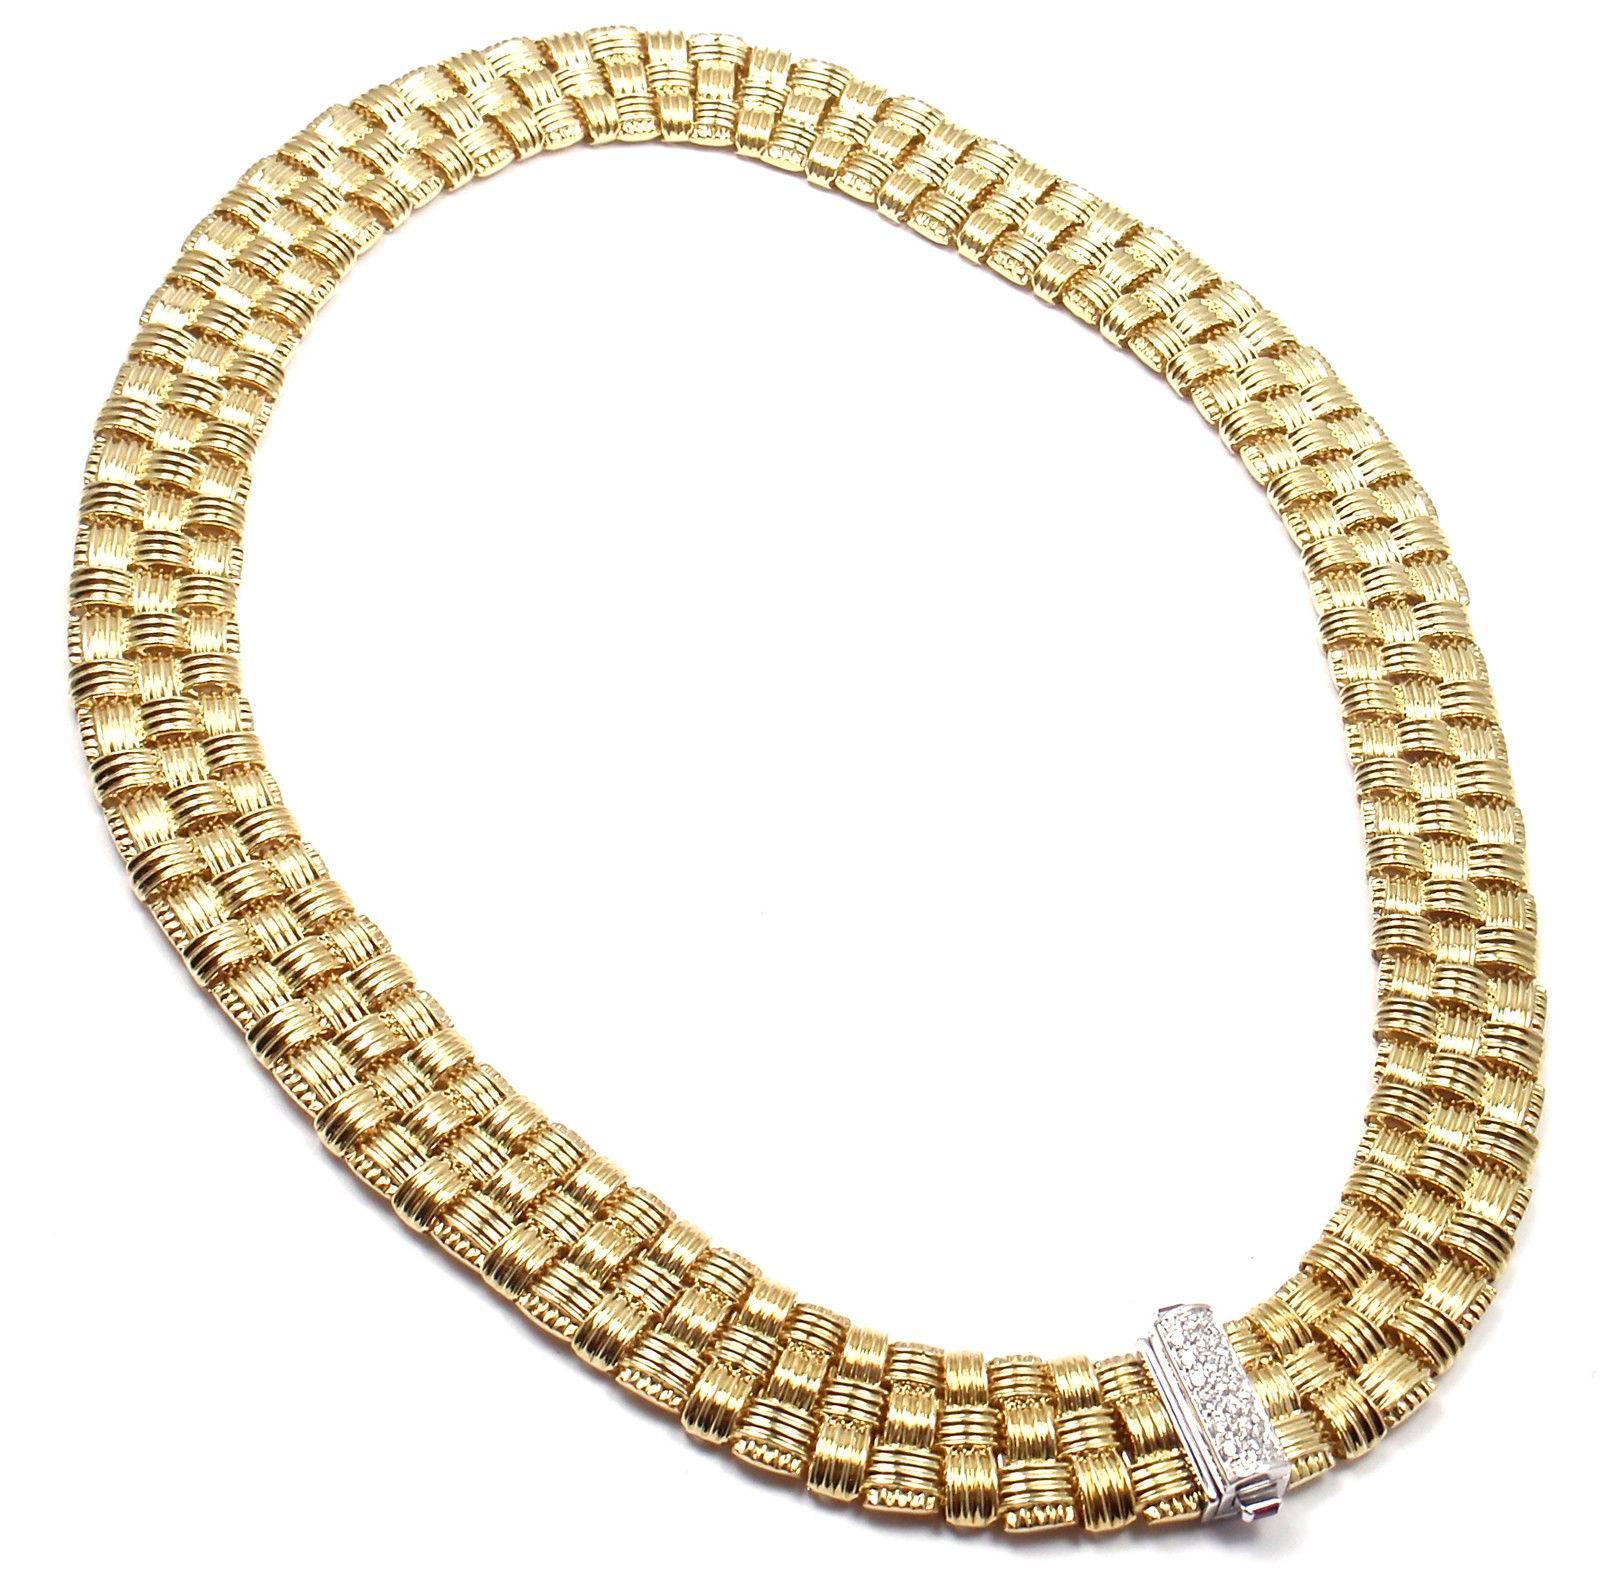 18k Yellow Gold Diamond Appassionata 3 Row Necklace by Roberto Coin.
With 19 round brilliant cut diamonds VS1 clarity, G color total weight 
approx. .22ct

Details:
Weight: 106 grams
Length: 16''
Width: 15mm
Stamped Hallmarks: Roberto Coin 1226VI